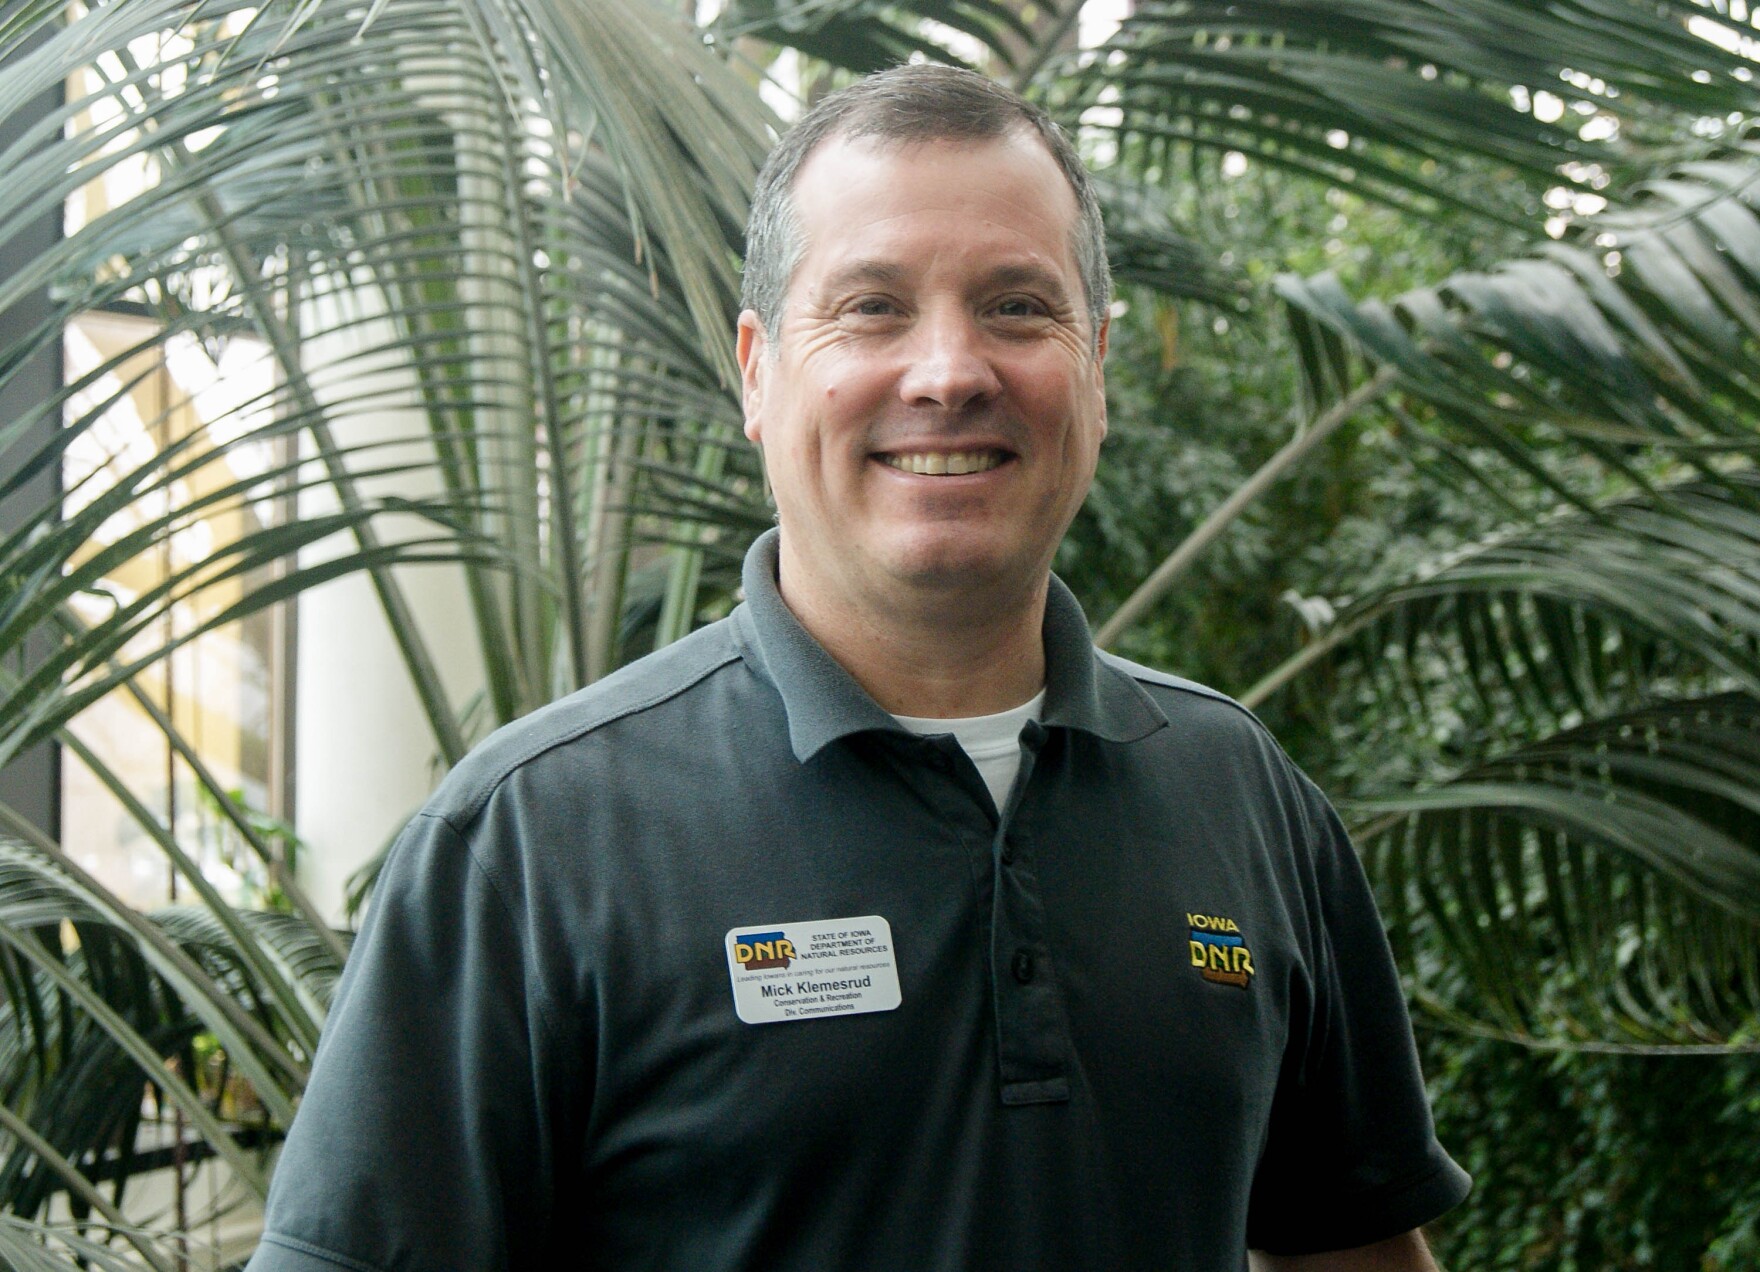 A man smiling at the camera in front of some leafy indoor plants.